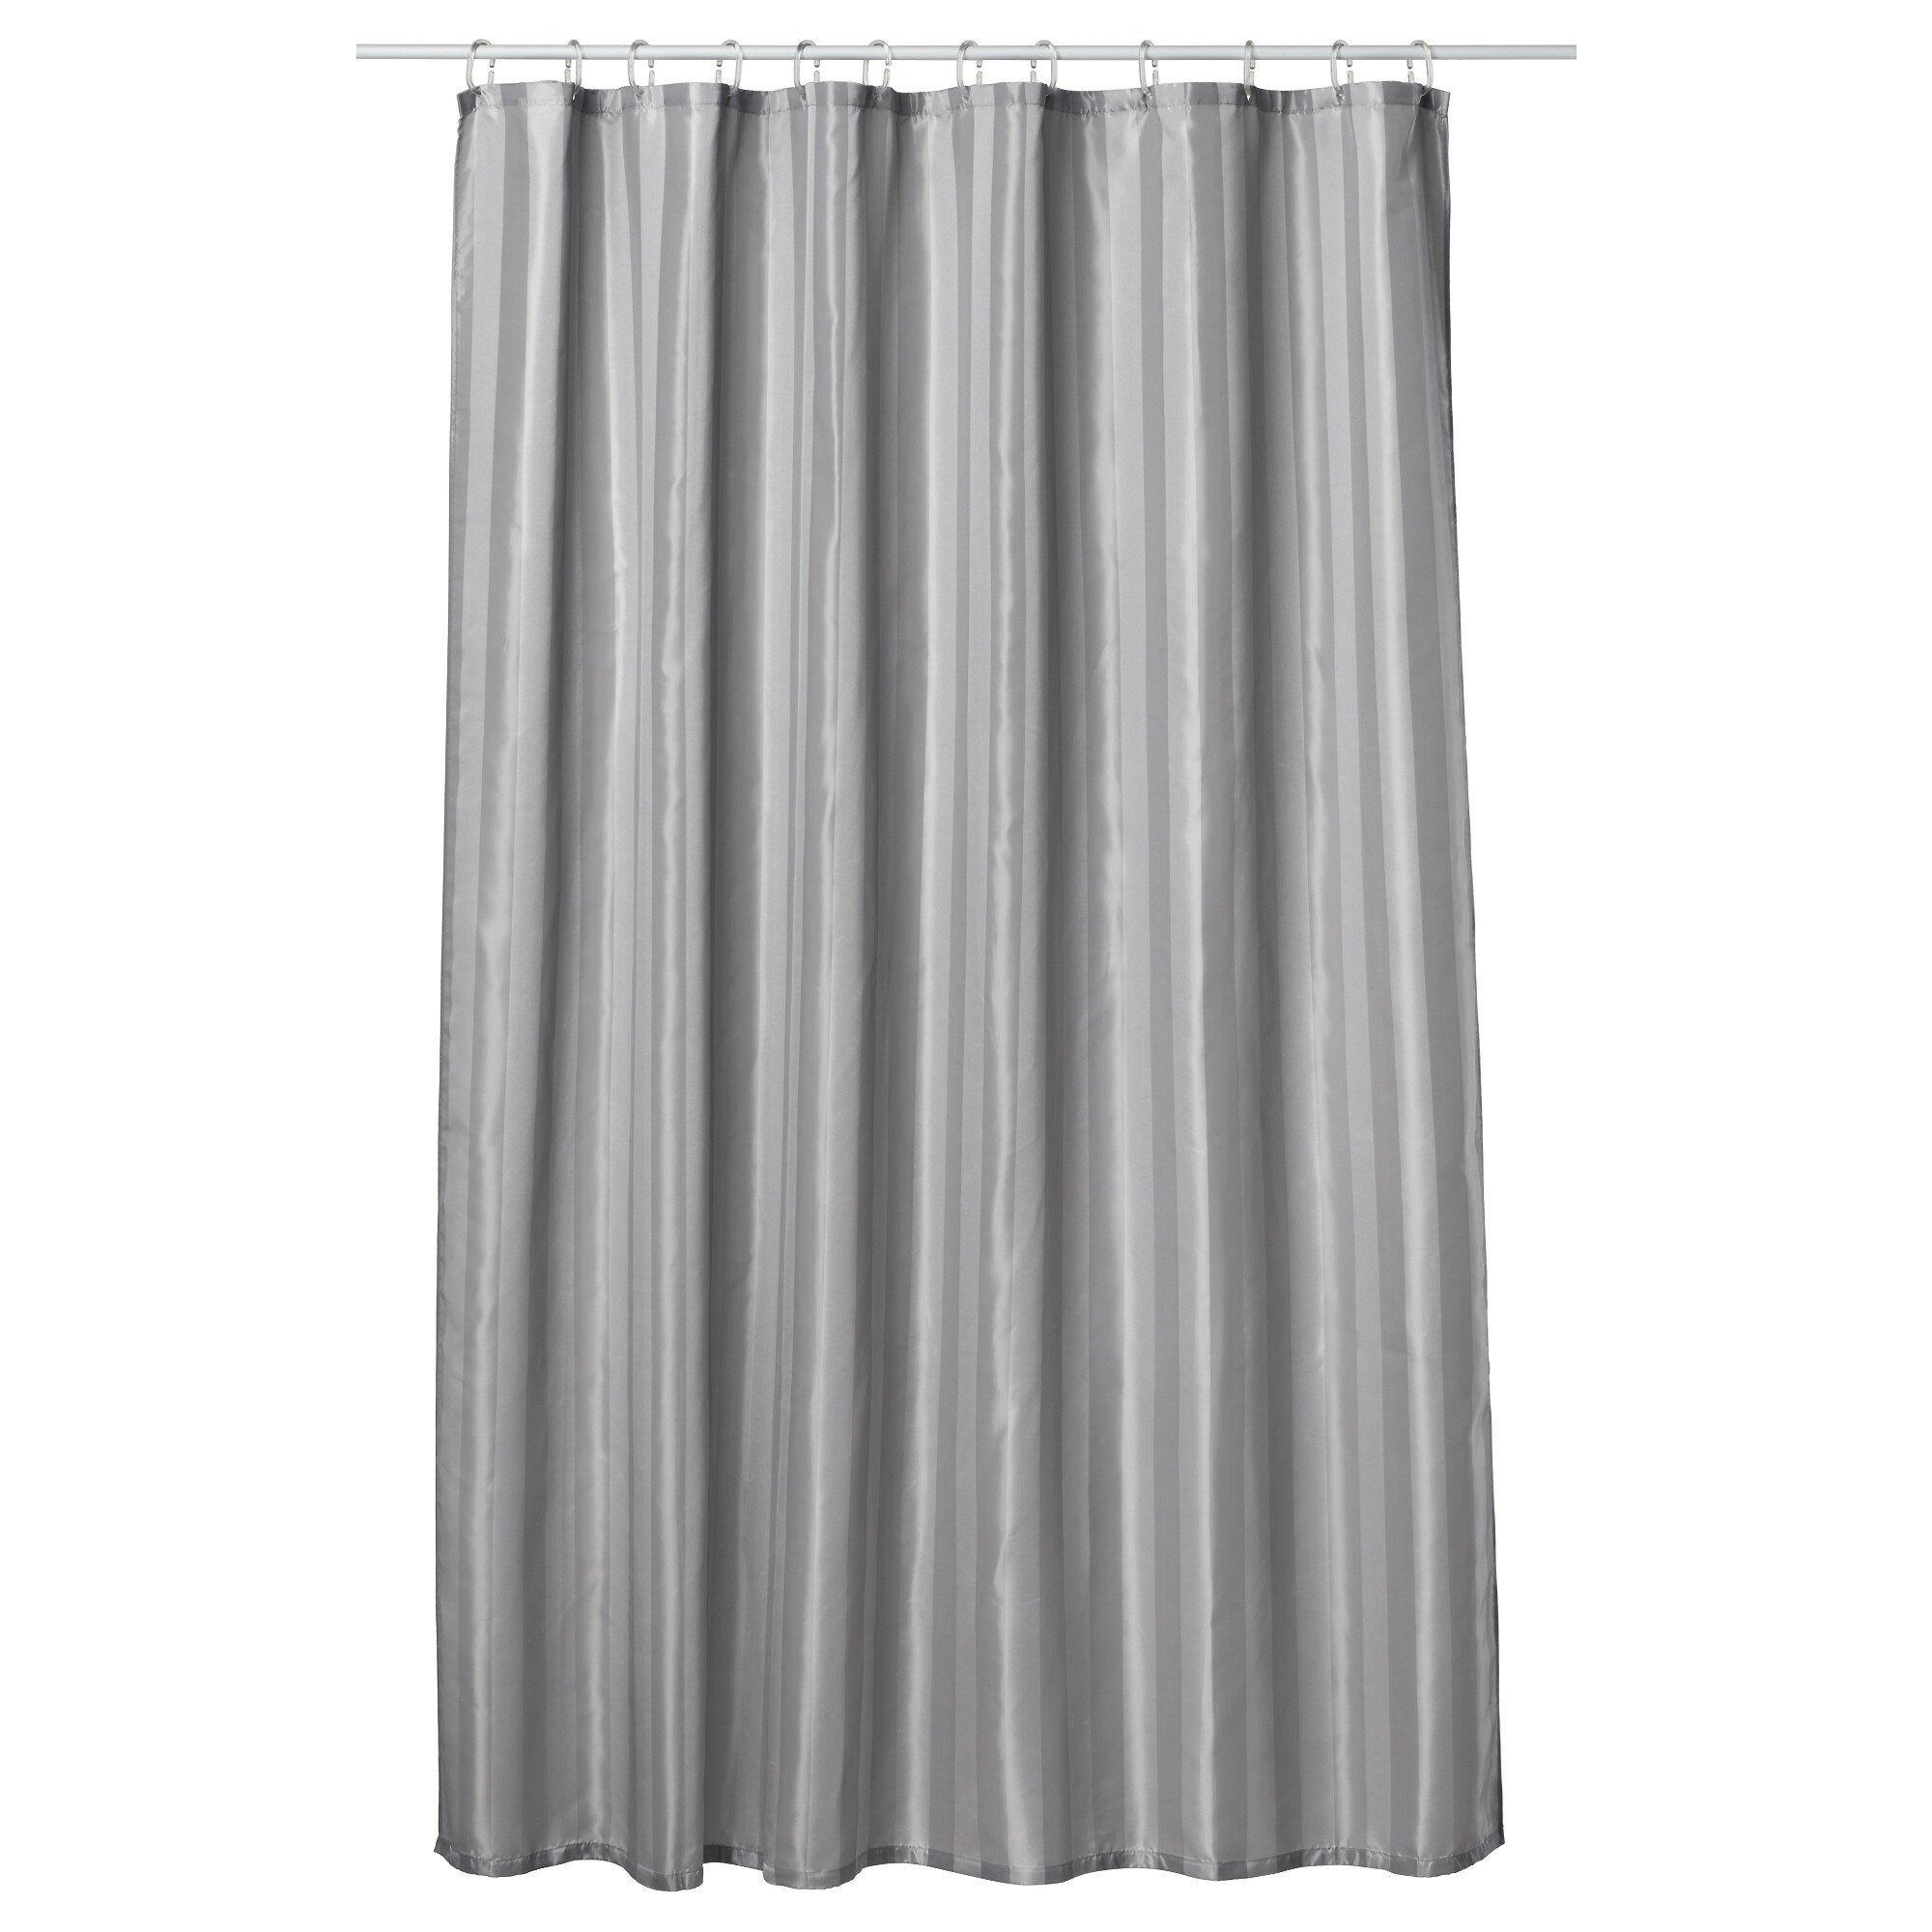 Ikea Shower Curtain | Grey and White Shower Curtains | Boys Shower Curtains